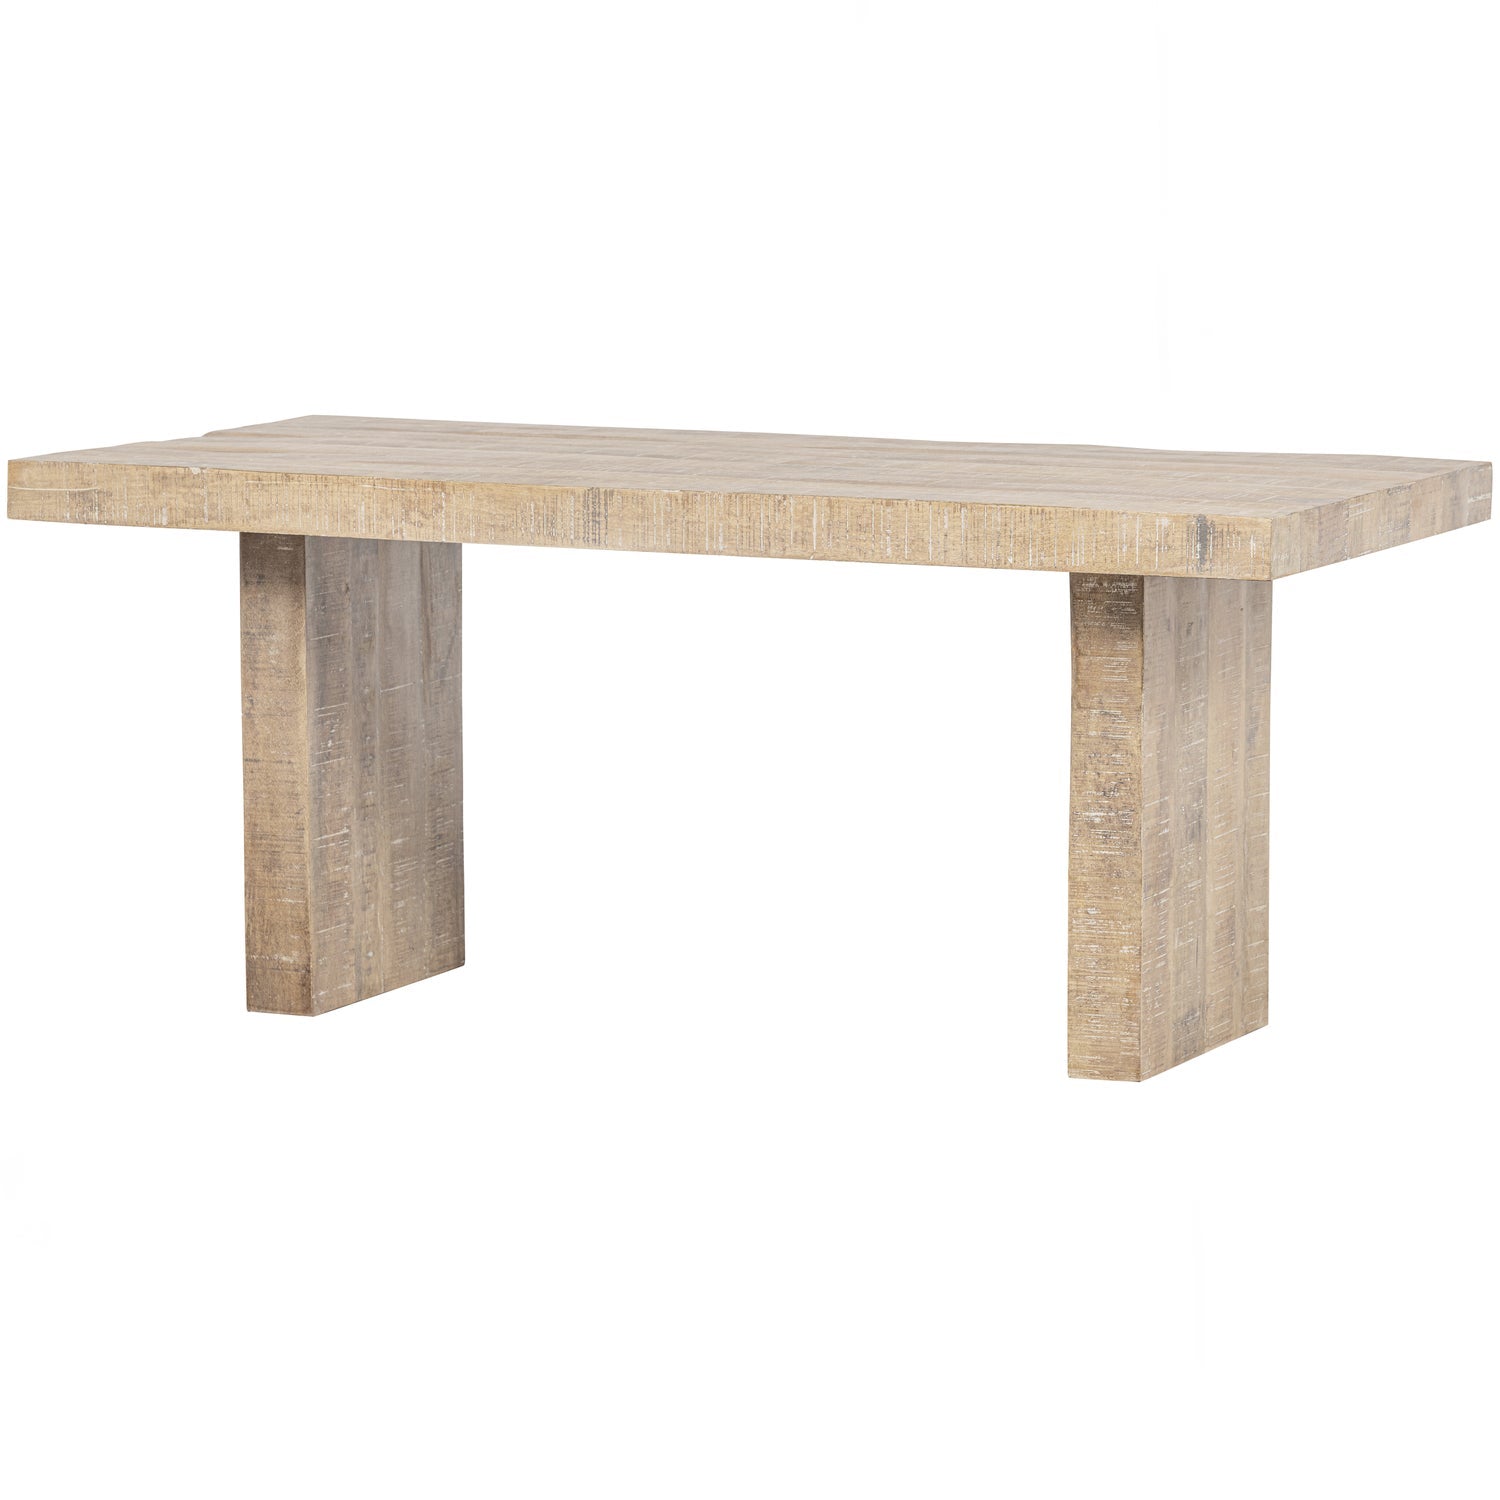 BALK DINING TABLE WOOD NATURAL 180x90CM